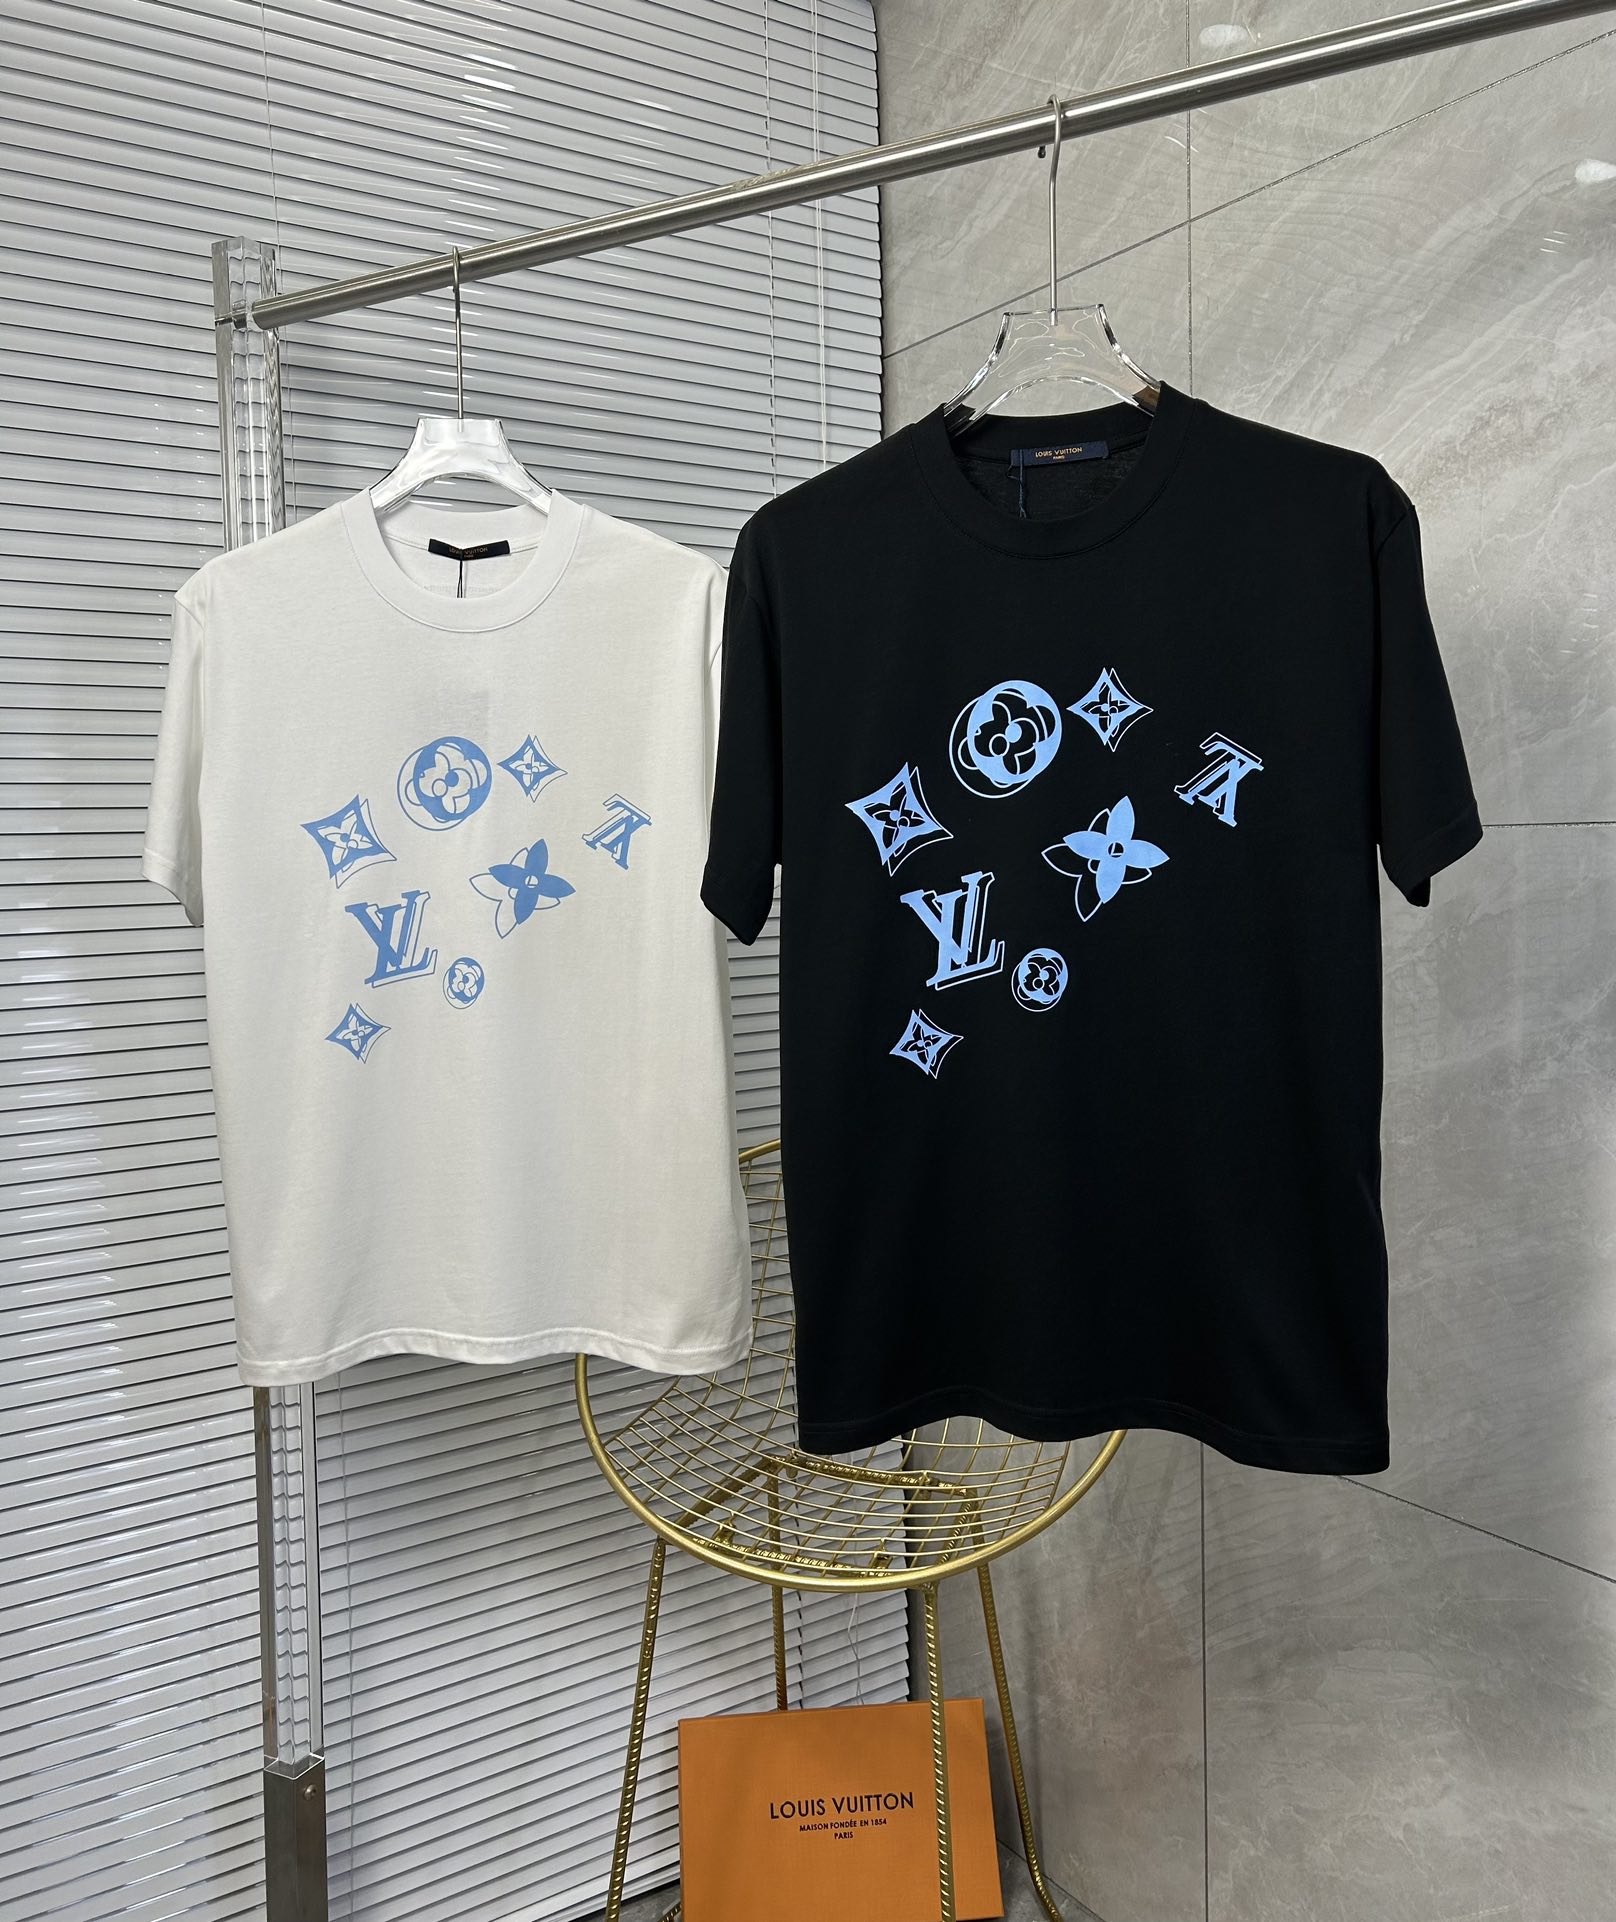 Louis Vuitton Clothing T-Shirt High Quality Happy Copy
 Black White Printing Unisex Spring/Summer Collection Fashion Short Sleeve